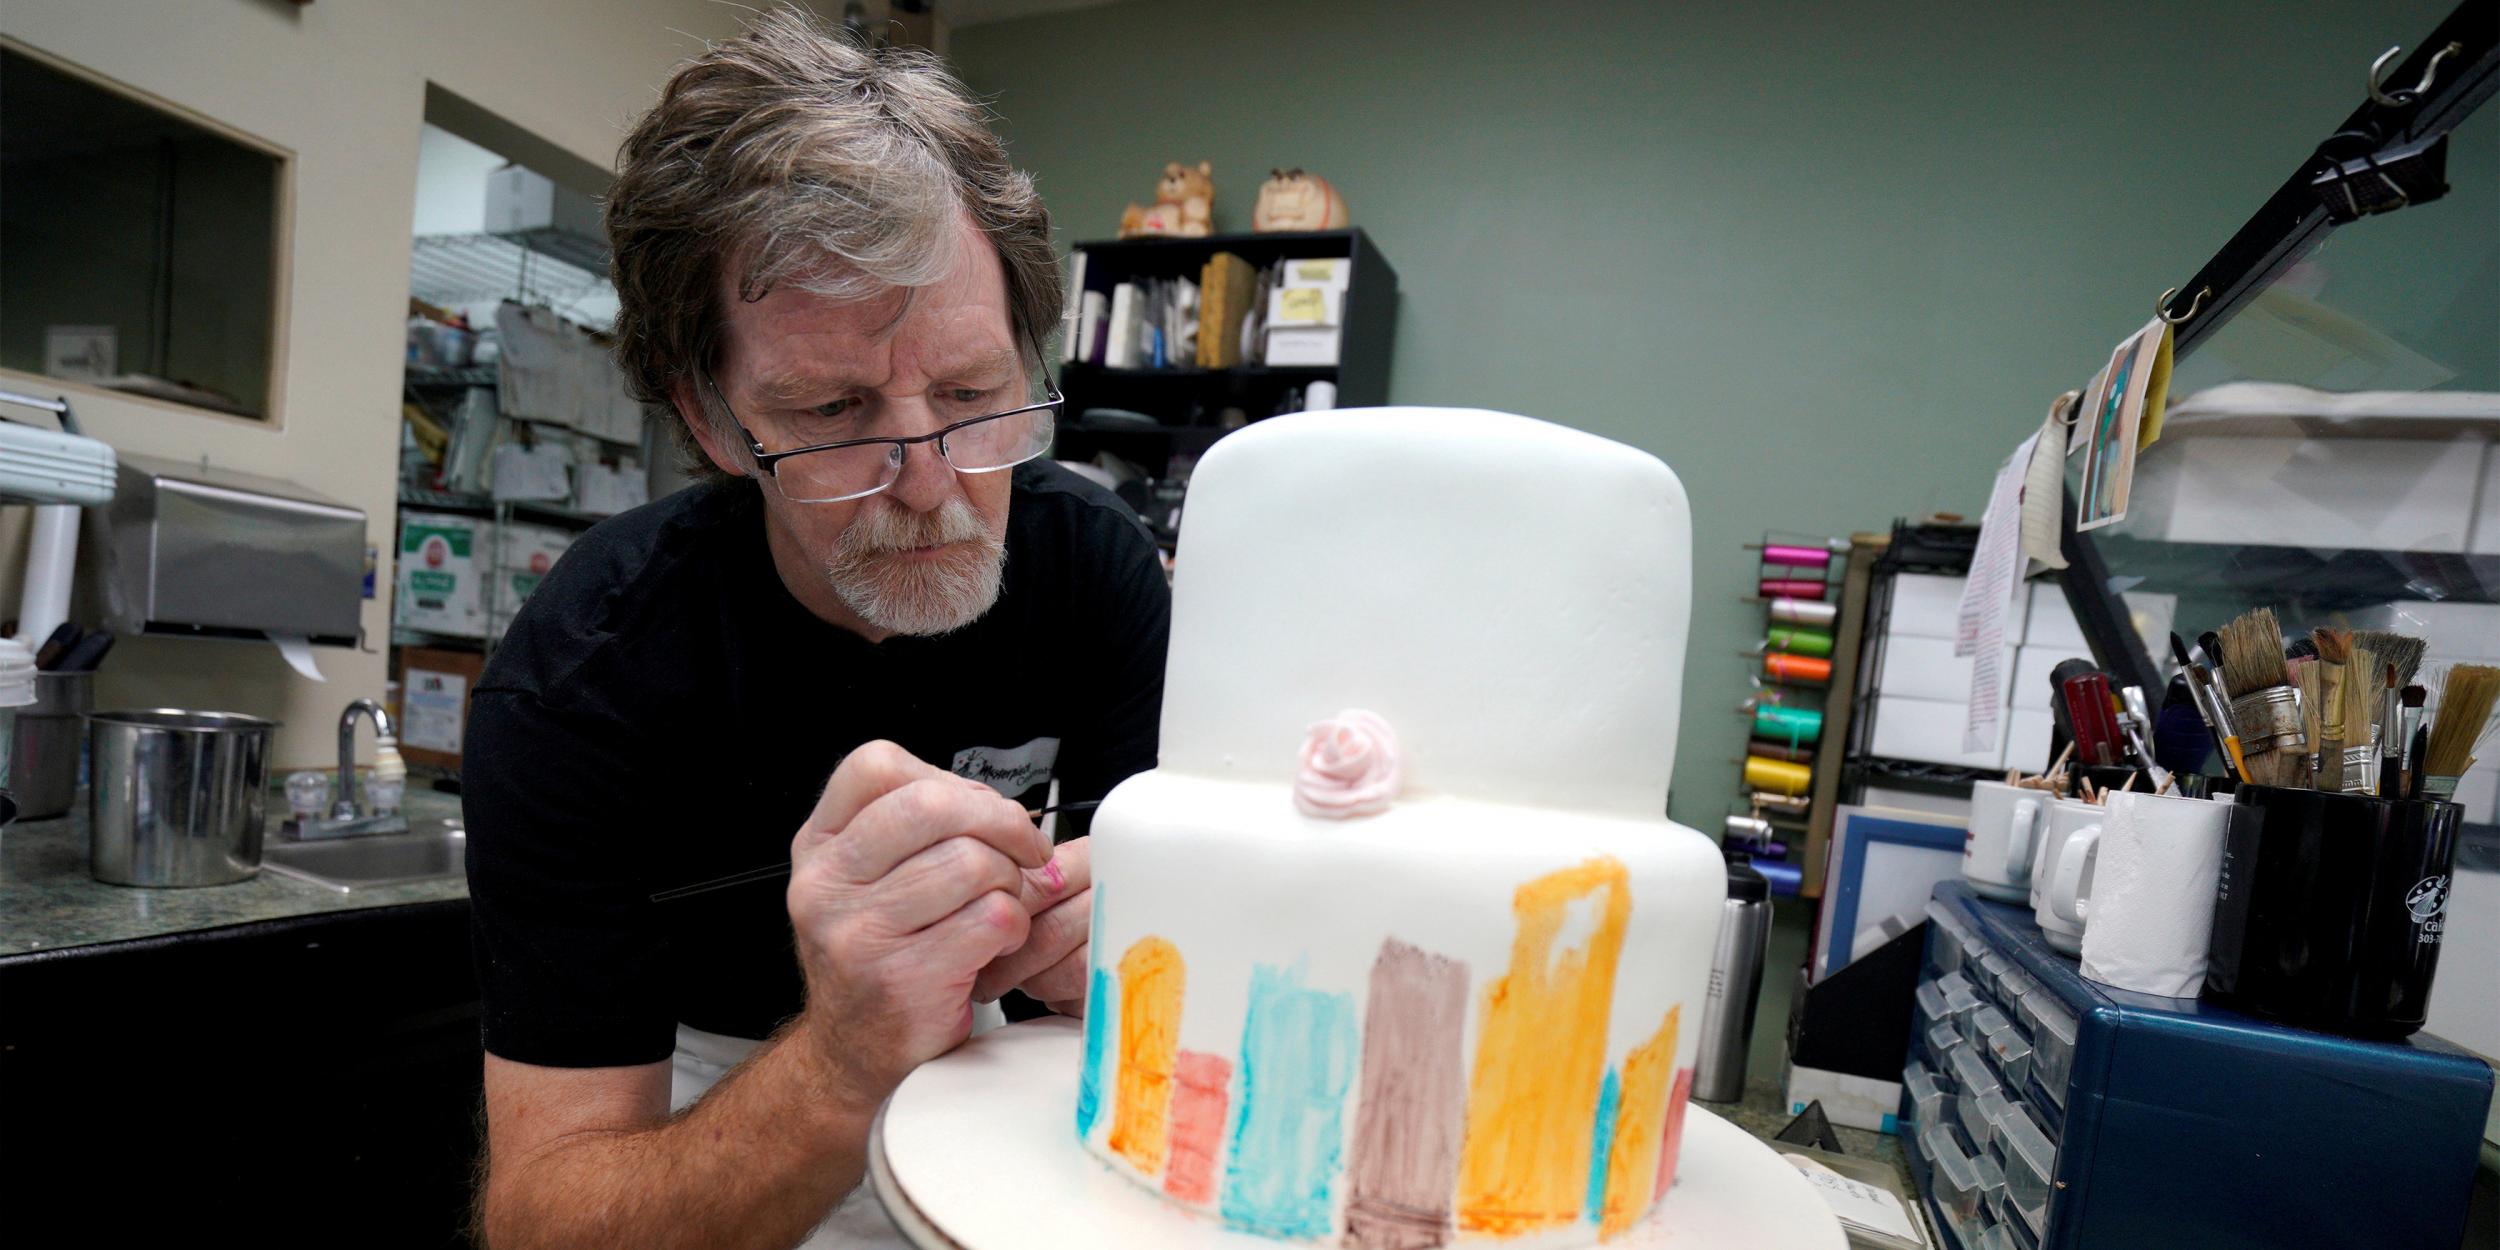 Baker Who Refused To Make Gay Wedding Cake Has Now Refused To Make Cake For Trans Woman Indy100